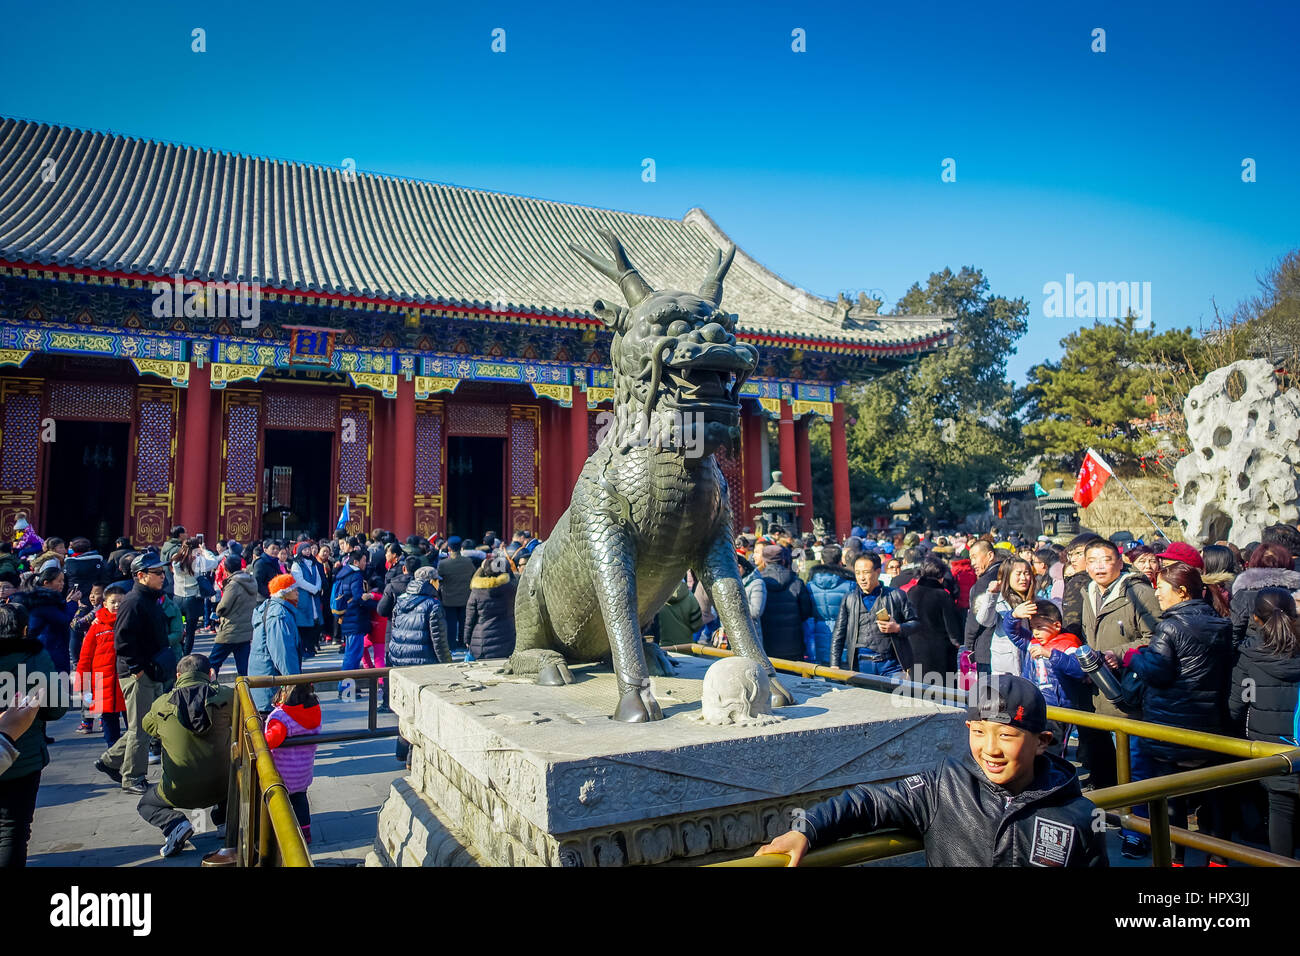 BEIJING, CHINA - 29 JANUARY, 2017: Tourists lining up for entrance into spring palace, a spectacular ensemble of lakes, gardens and ancient chinese pa Stock Photo